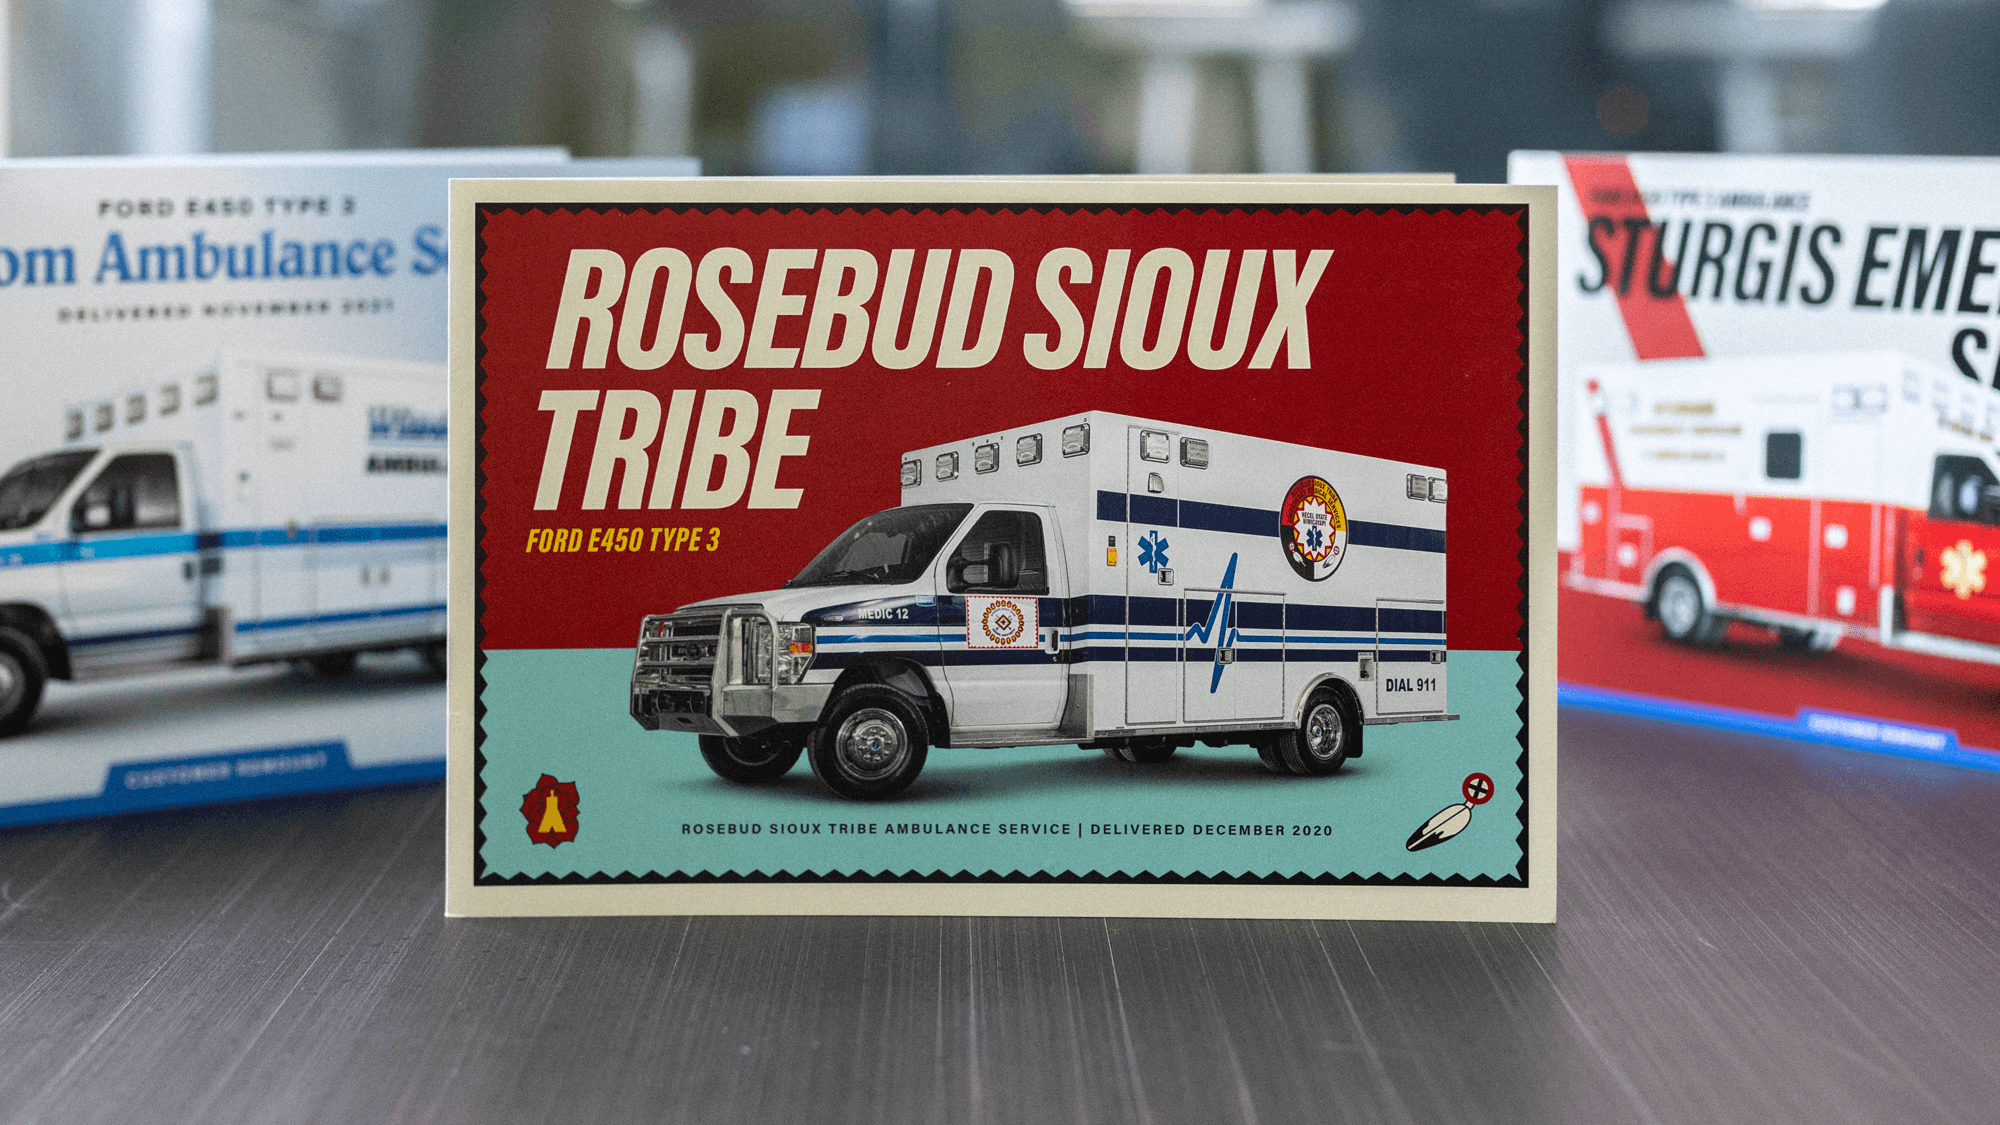 Photograph of three cards set up on table top, featuring Rosebud Sioux Tribe in middle